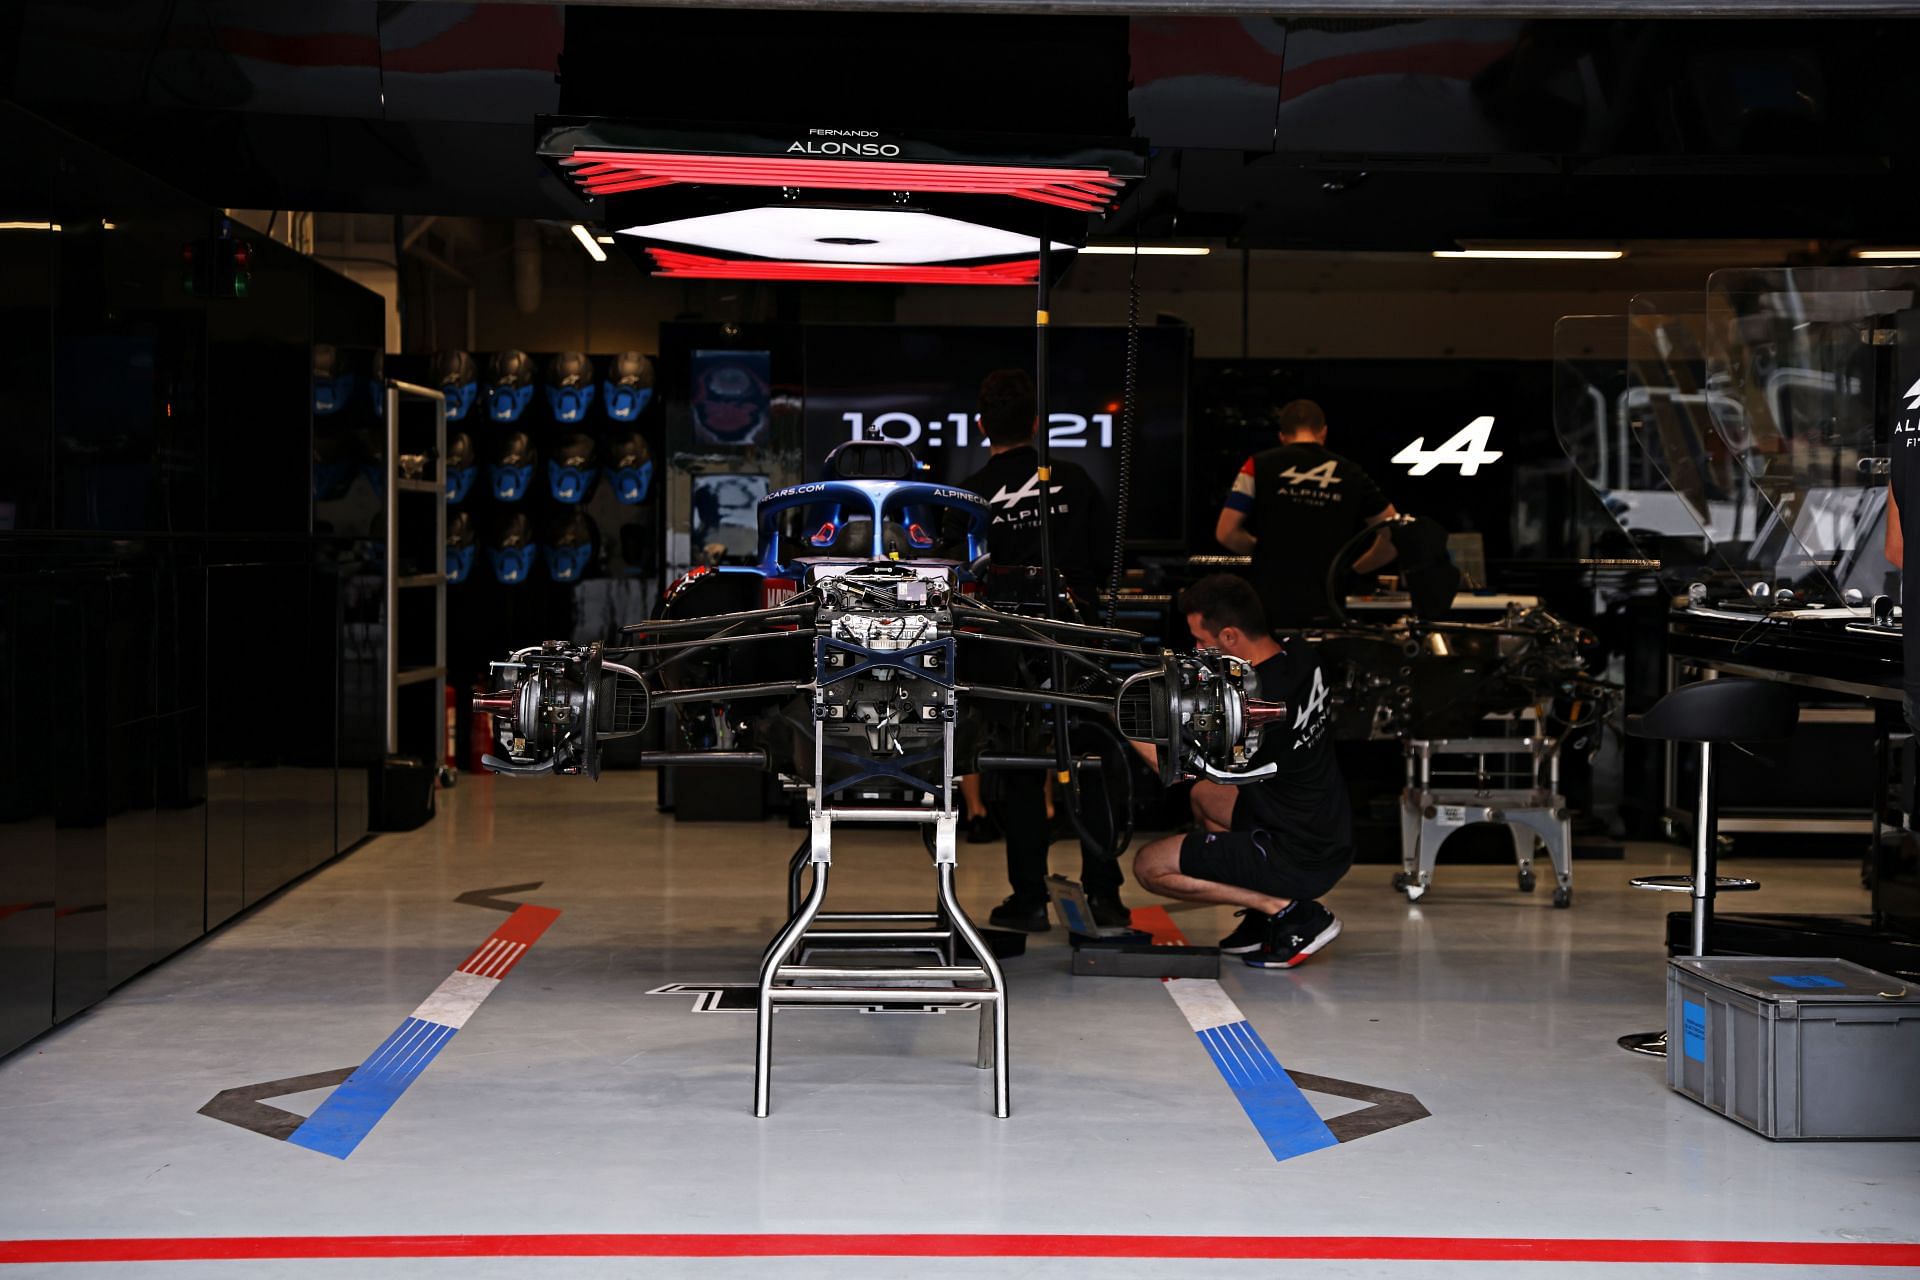 The Alpine F1 Team works in the garage ahead of the 2021 Brazil GP (Photo by Buda Mendes/Getty Images)